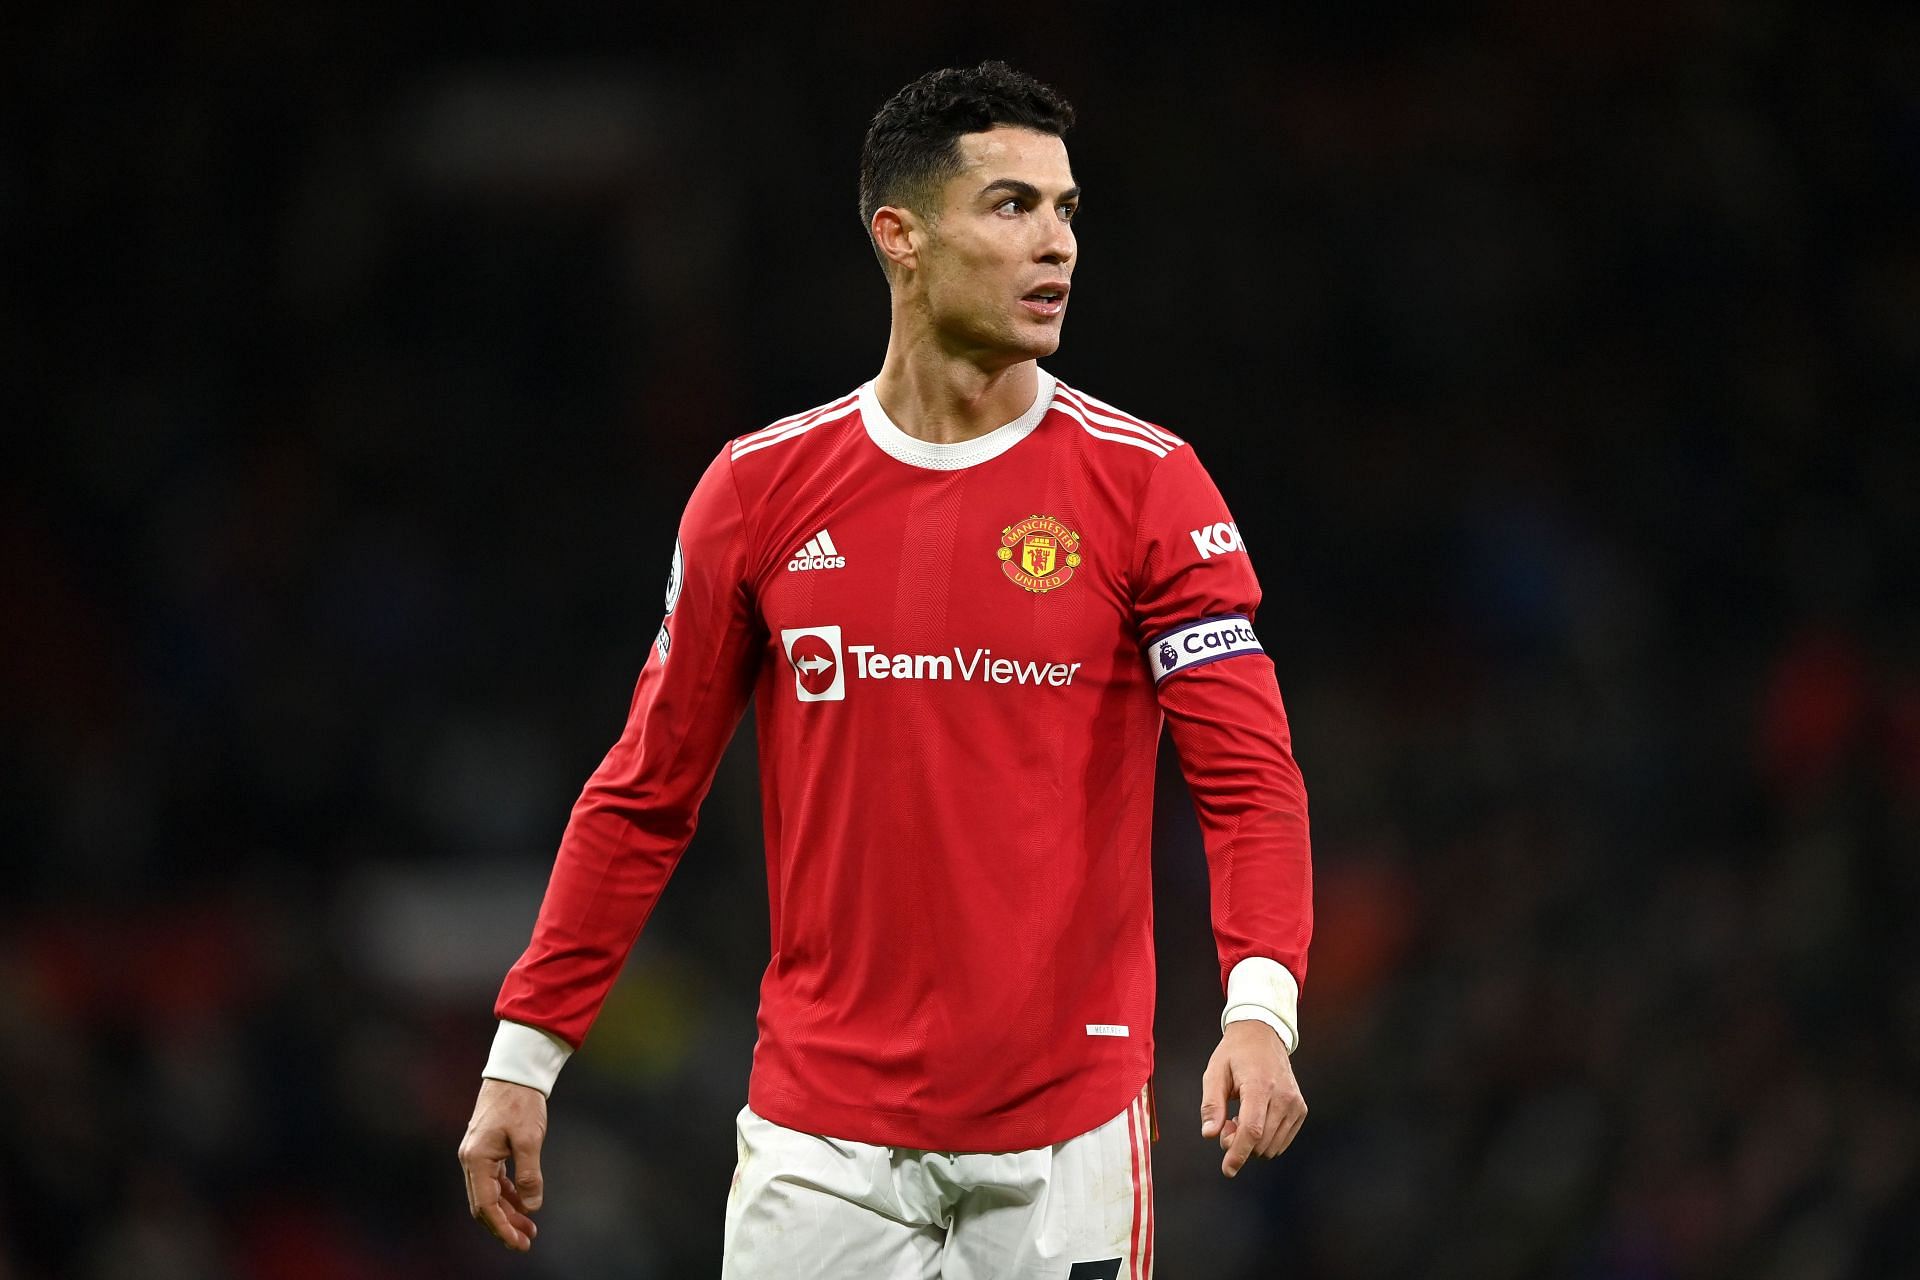 Cristiano Ronaldo&rsquo;s future at Manchester United is up in the air after the Wolves defeat.